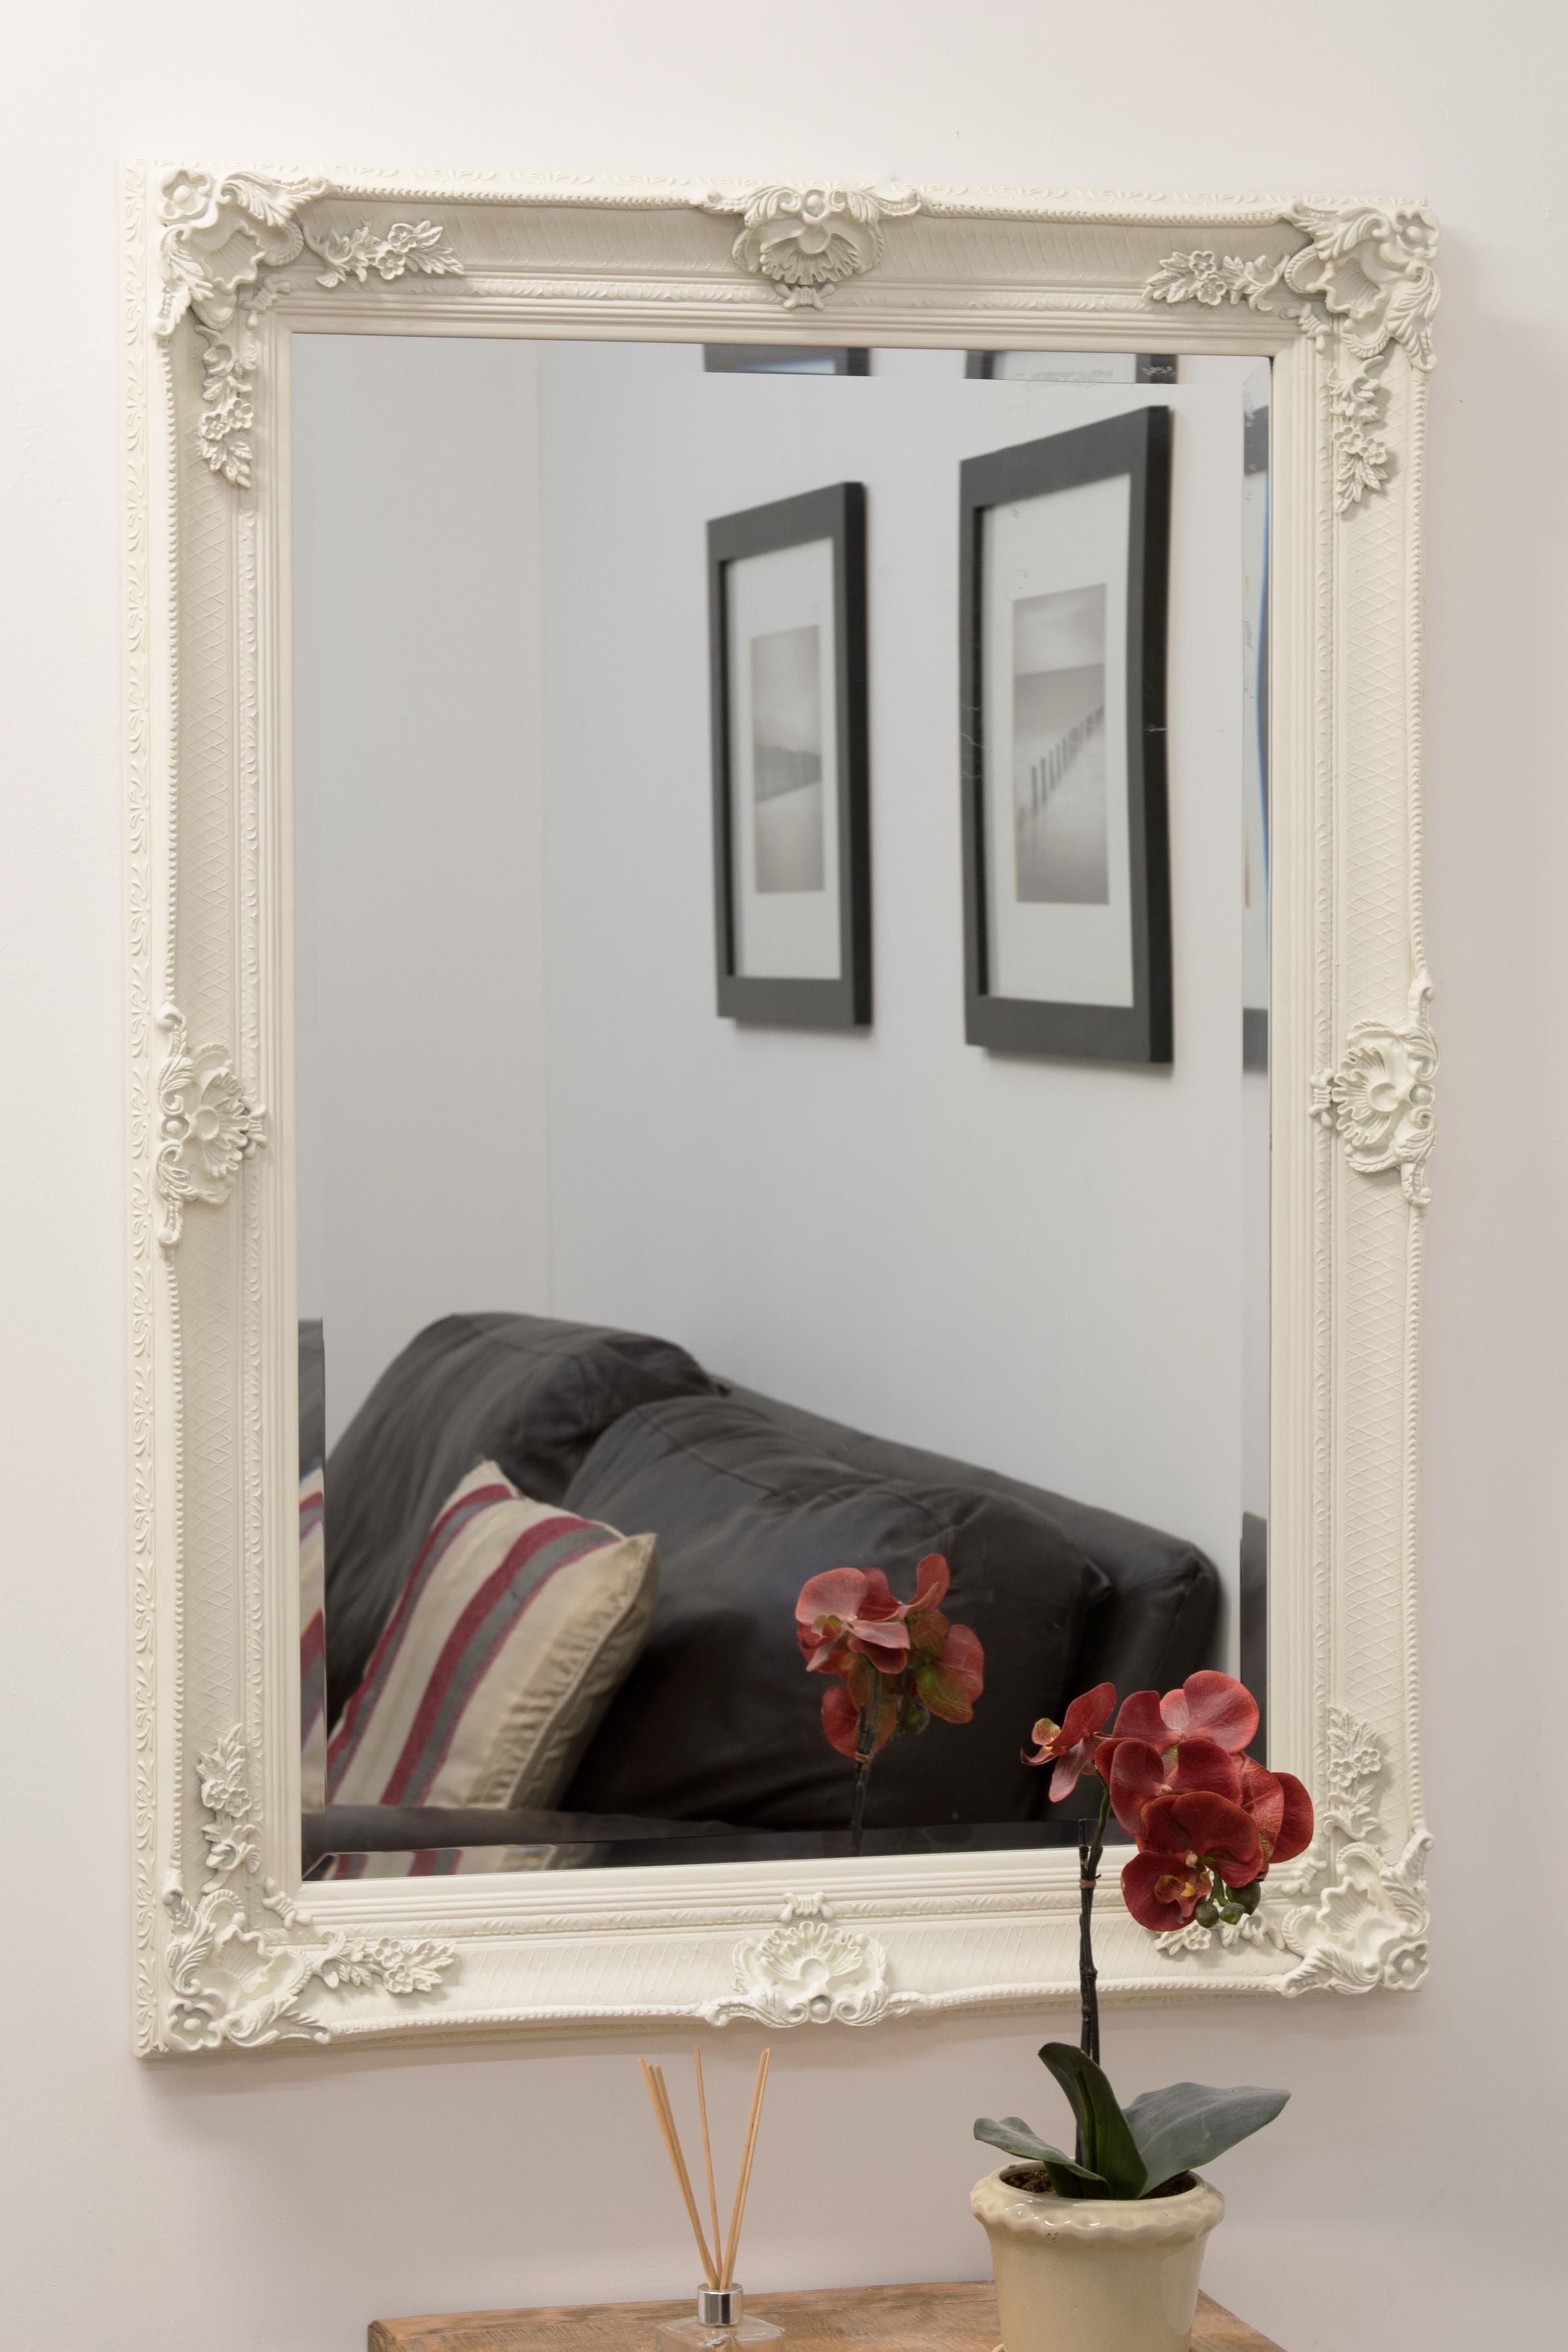 Wall Mirrors Images Large Designer Wall Mirrors Posh Decorative With Big Ornate Mirrors (View 9 of 15)